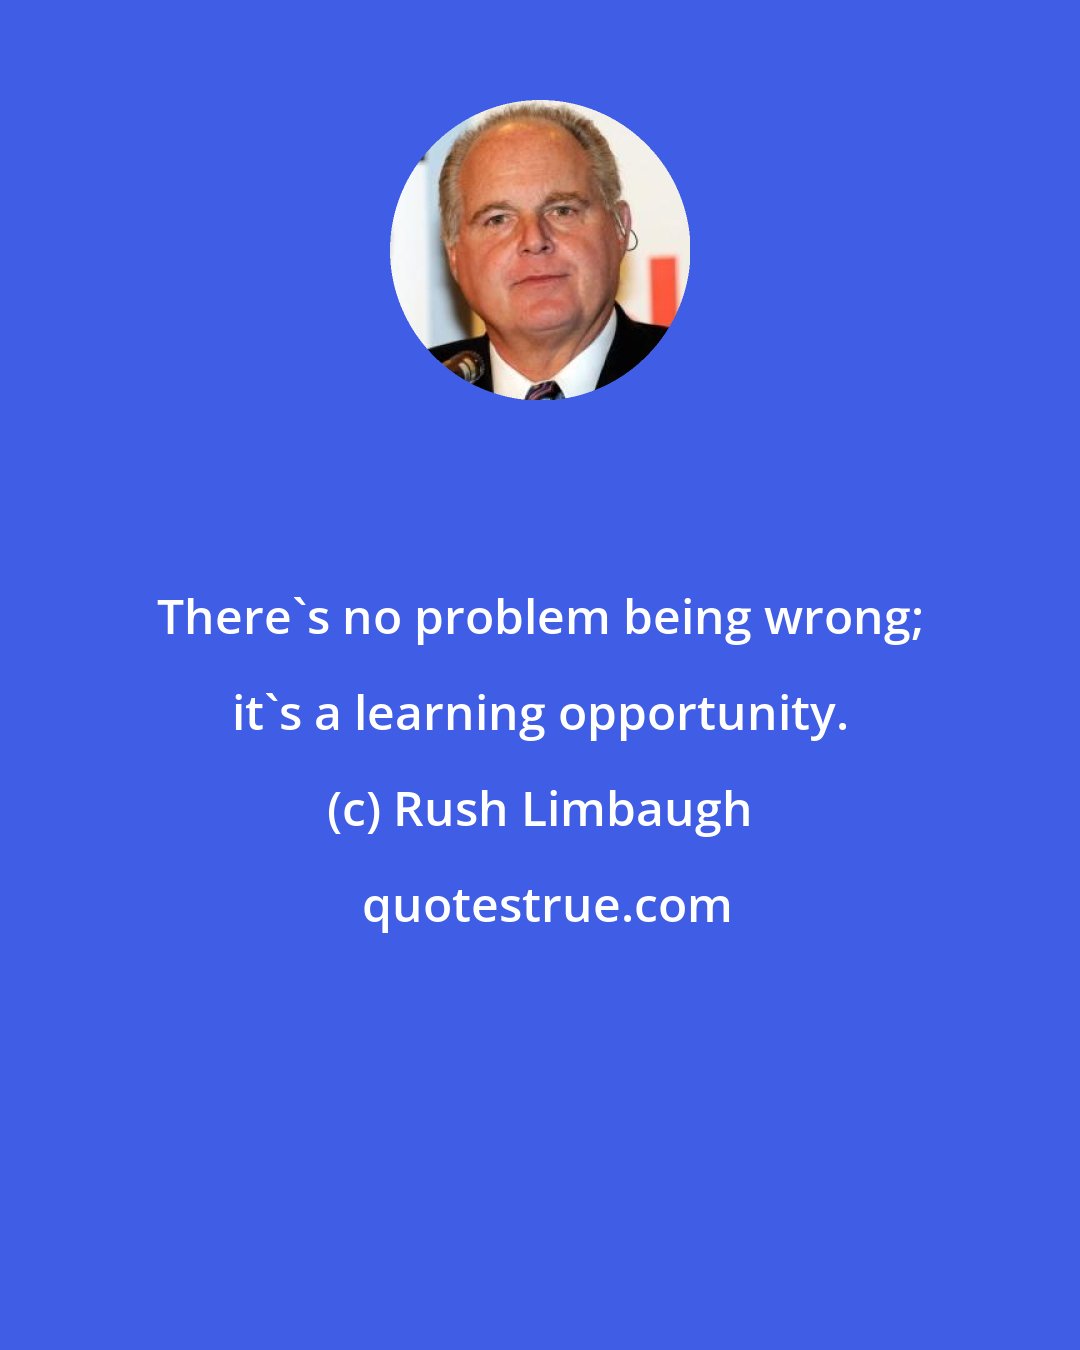 Rush Limbaugh: There's no problem being wrong; it's a learning opportunity.